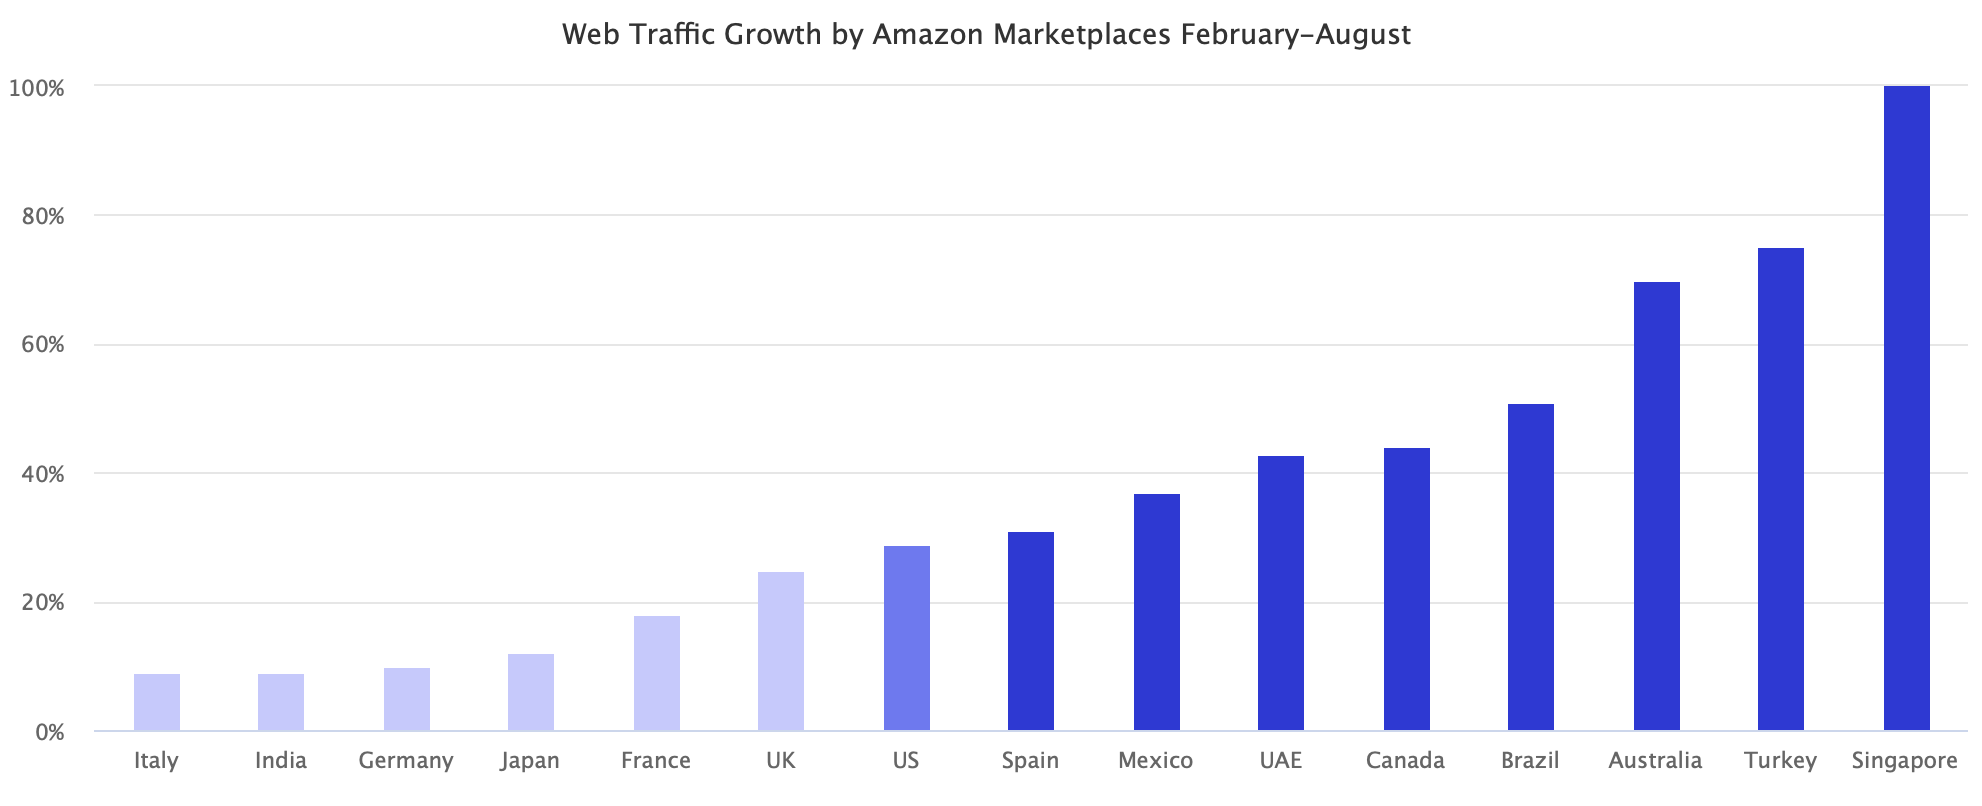 Web Traffic Growth by Amazon Marketplaces February-August